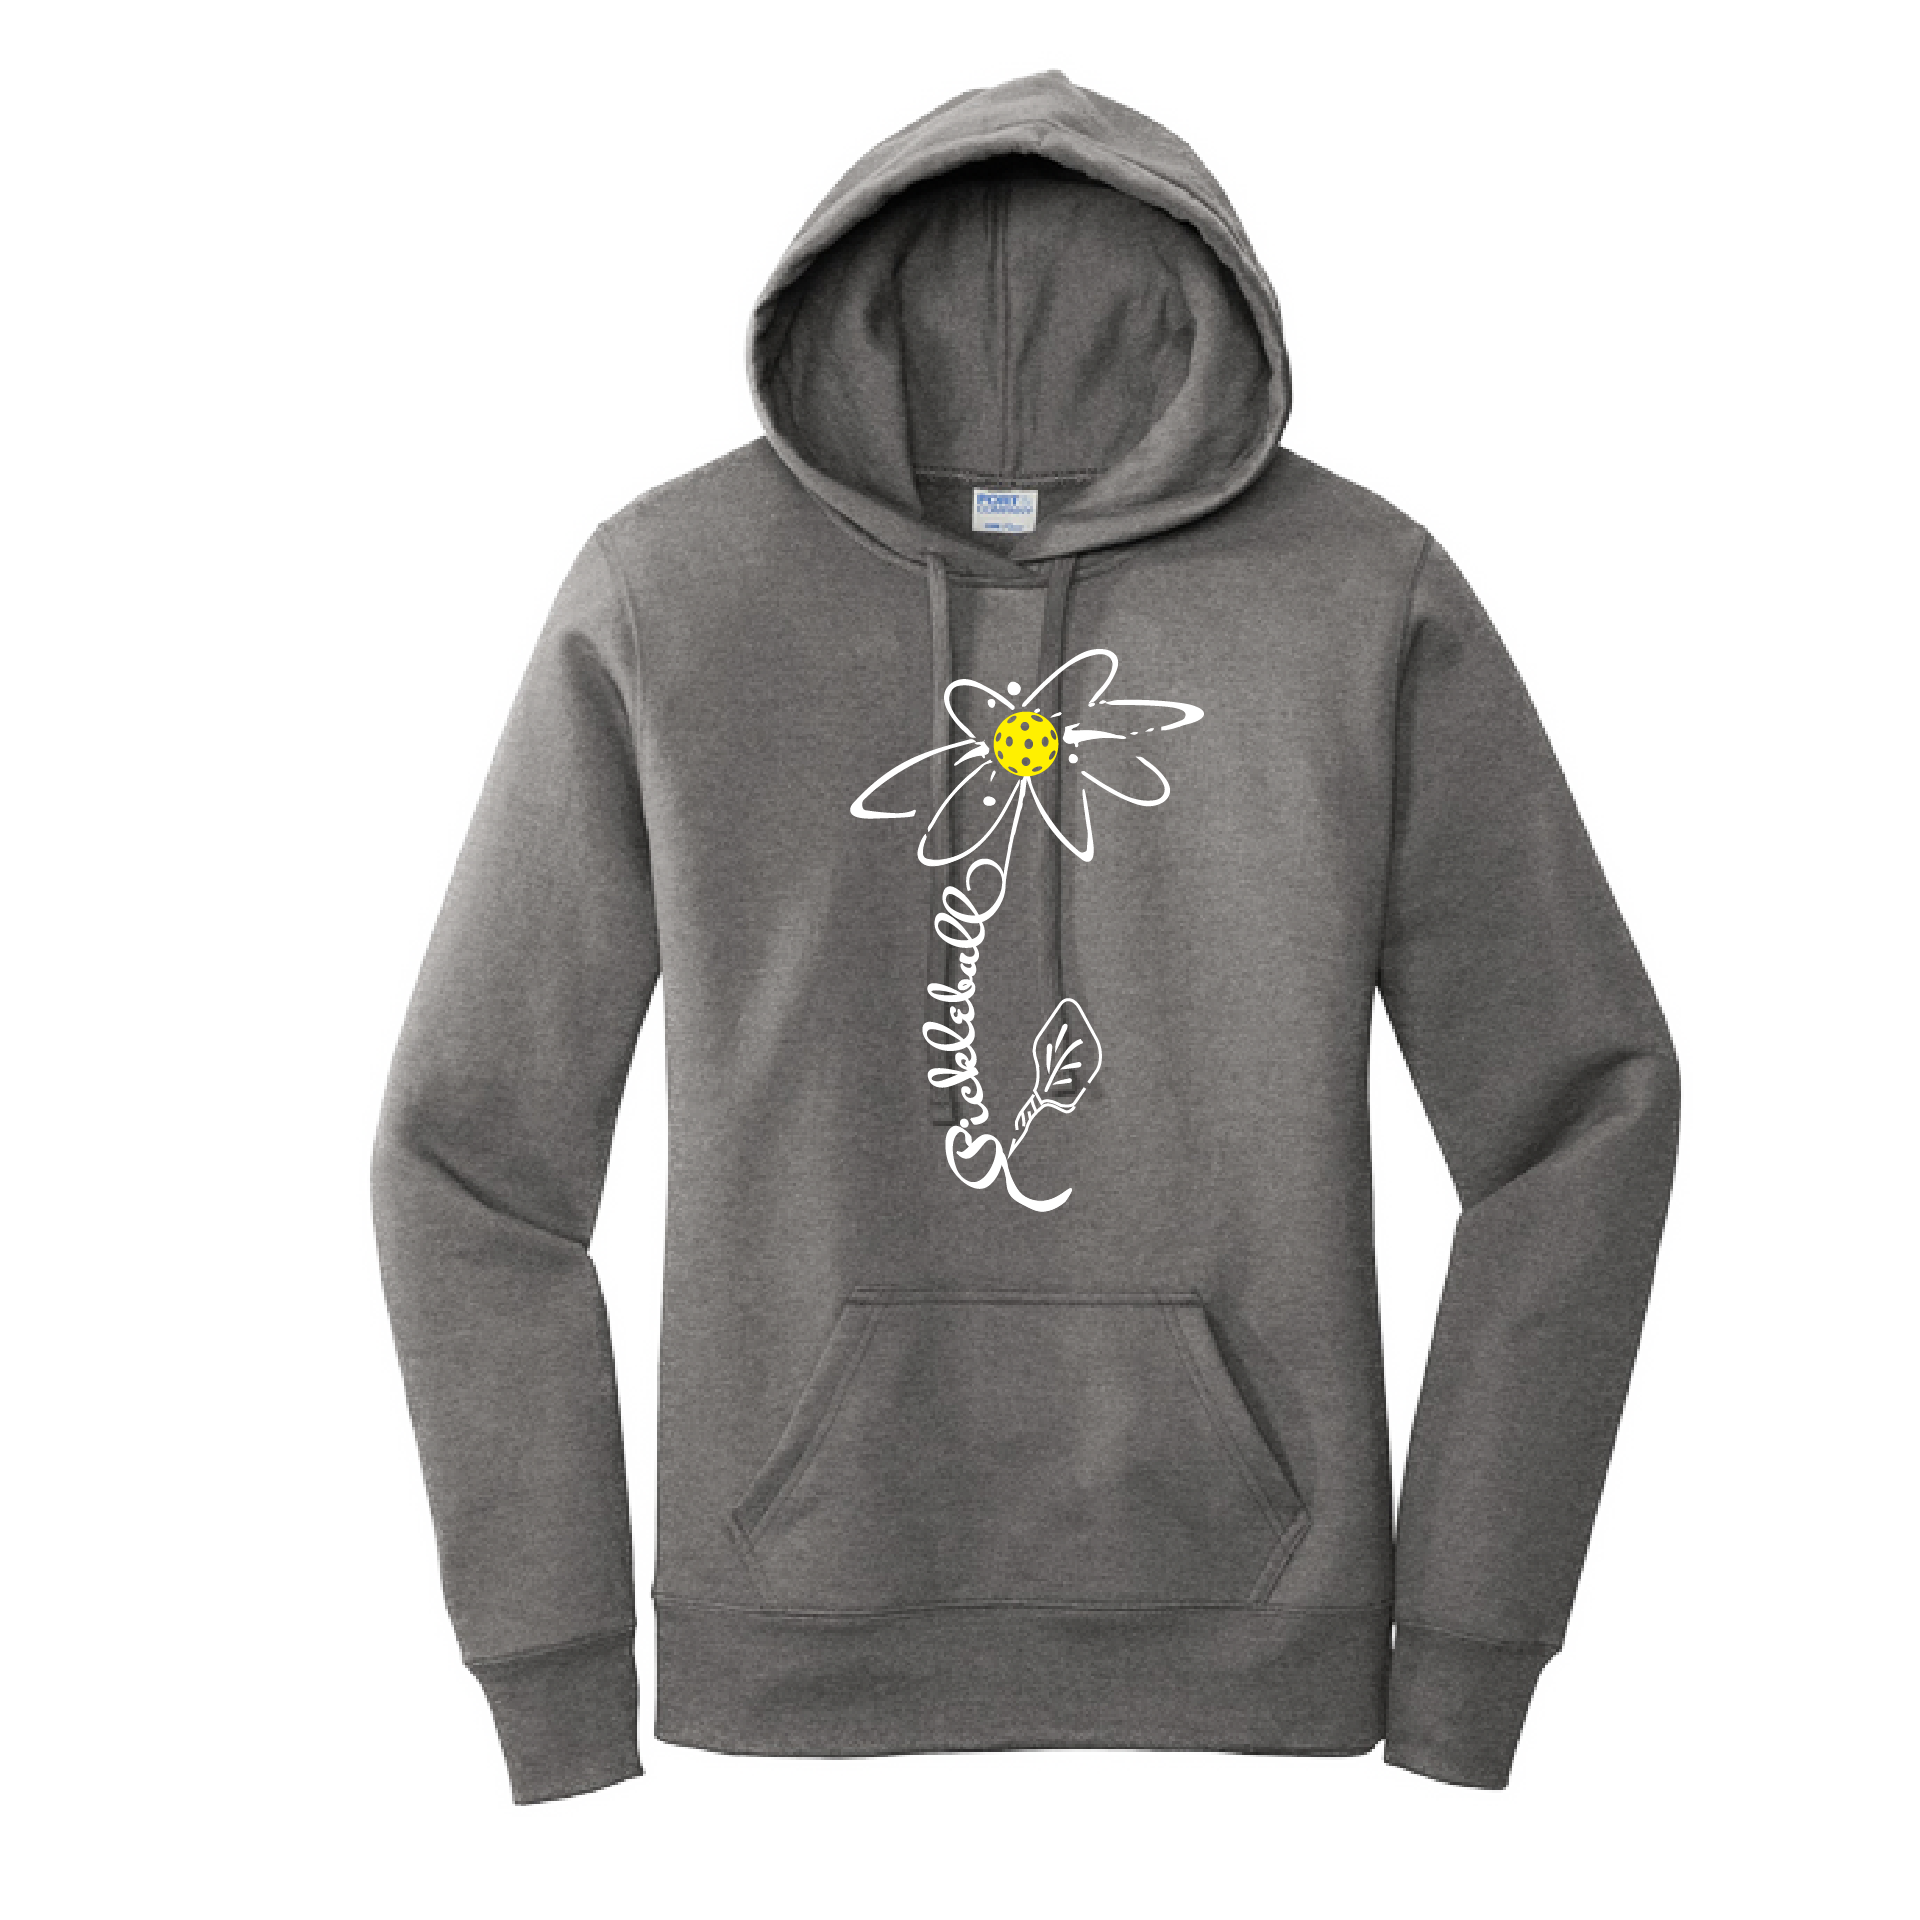 Pickleball Design: Pickleball Flower  Women's Hooded pullover Sweatshirt  Turn up the volume in this Women's Sweatshirts with its perfect mix of softness and attitude. Ultra soft lined inside with a lined hood also. This is fitted nicely for a women's figure. Front pouch pocket.